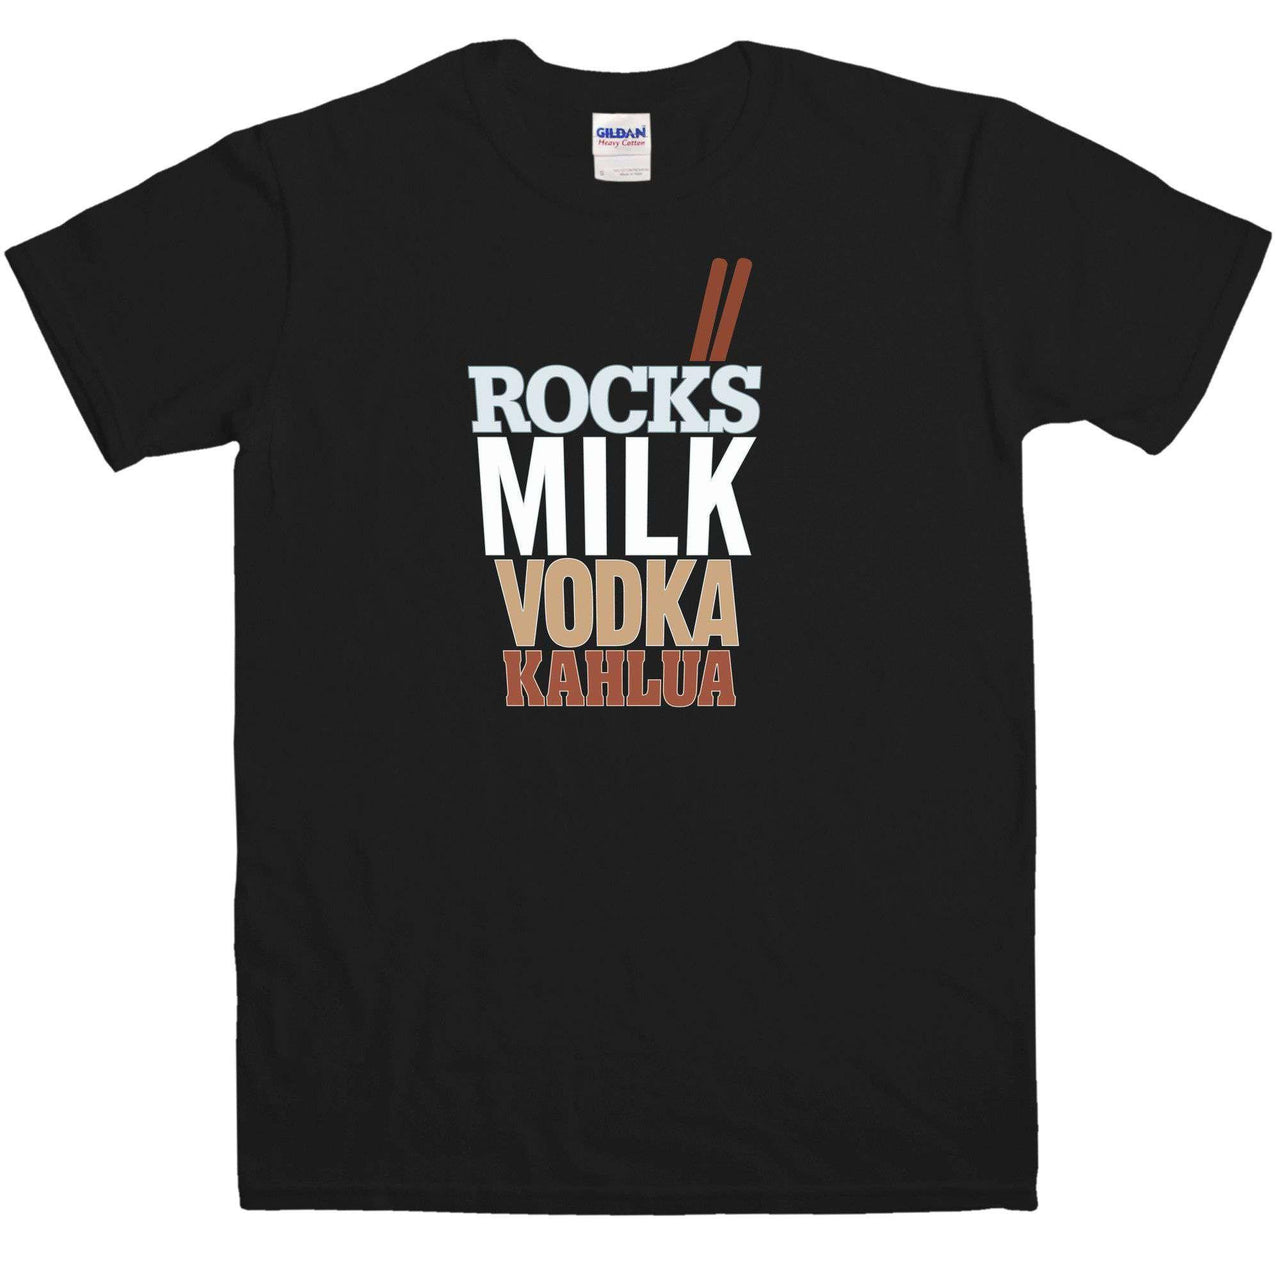 Cocktail White Russian Mens Graphic T-Shirt 8Ball